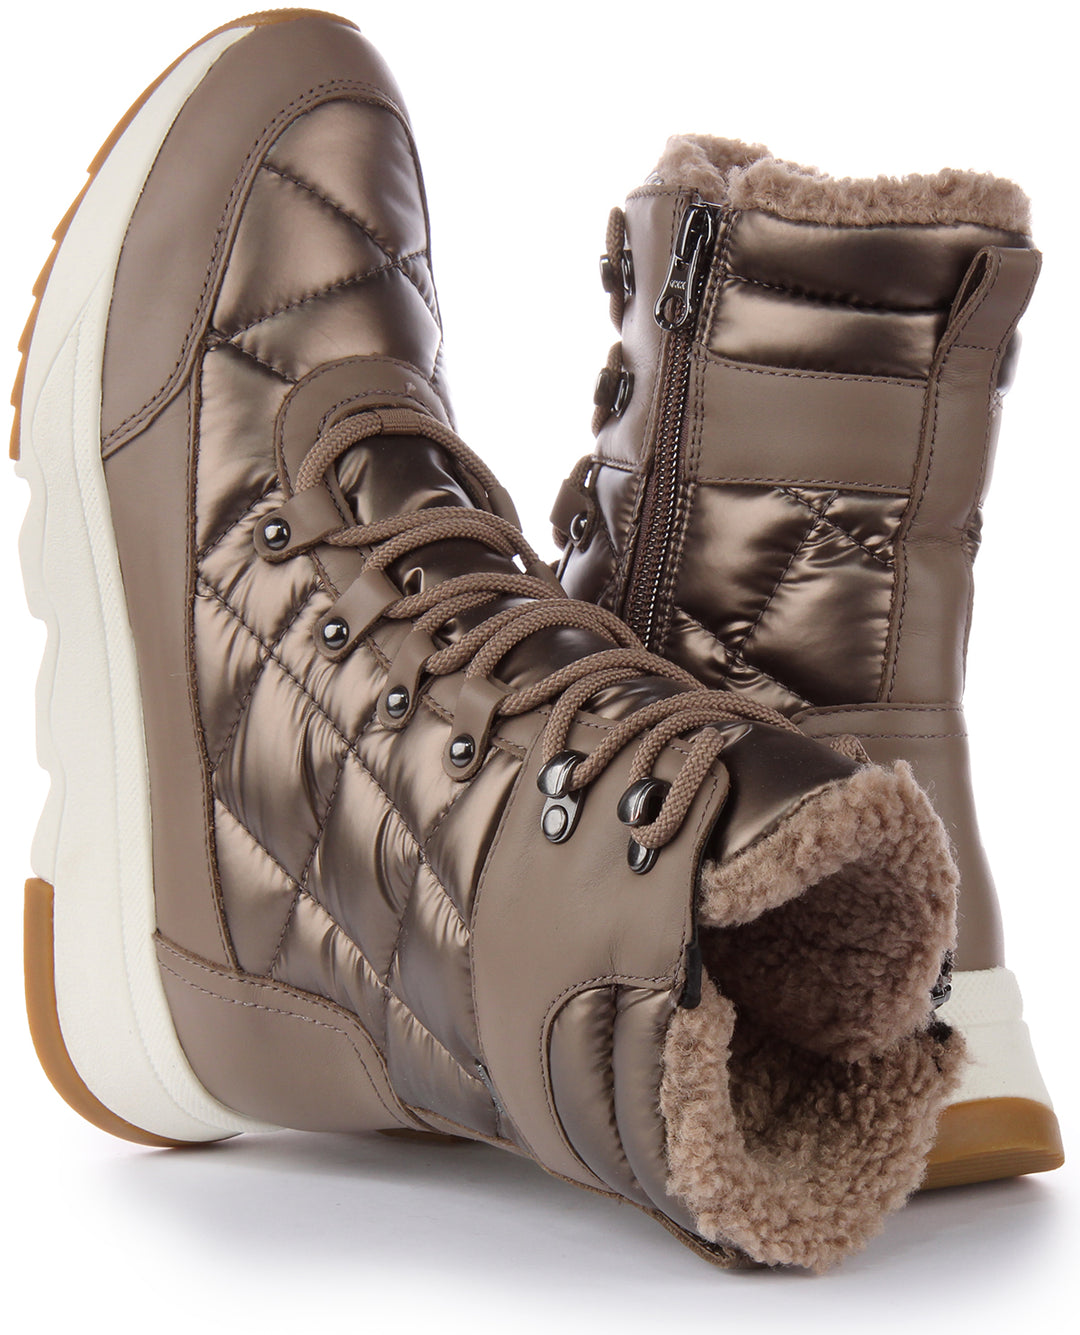 Geox Falena B Abx In Brown For Women